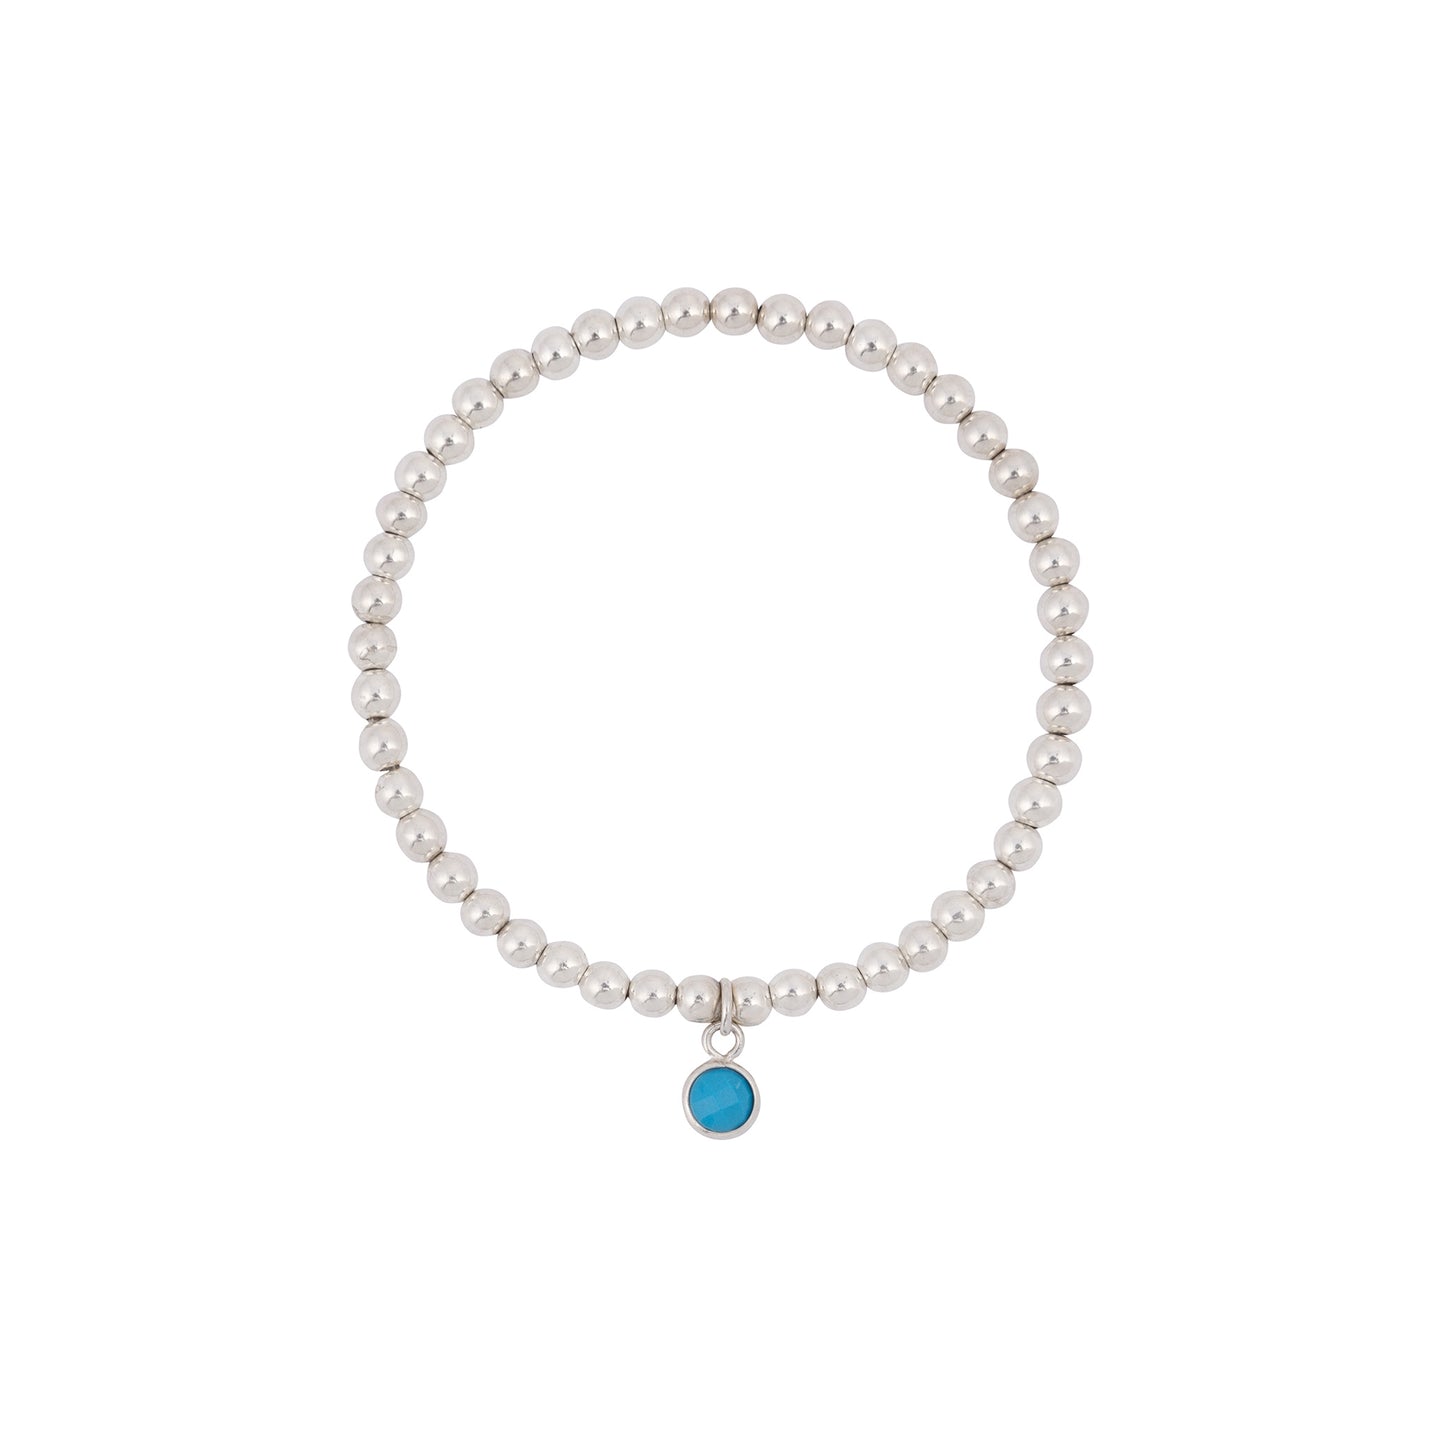 A delicate sterling silver bead bracelet featuring a central turquoise birthstone charm. The bracelet consists of evenly spaced, shiny silver beads and is simple yet elegant, highlighting the small turquoise pendant as its focal point. Perfect for December birthstone bracelets, the Turquoise December Birthstone Bracelet by Made Here with Love.